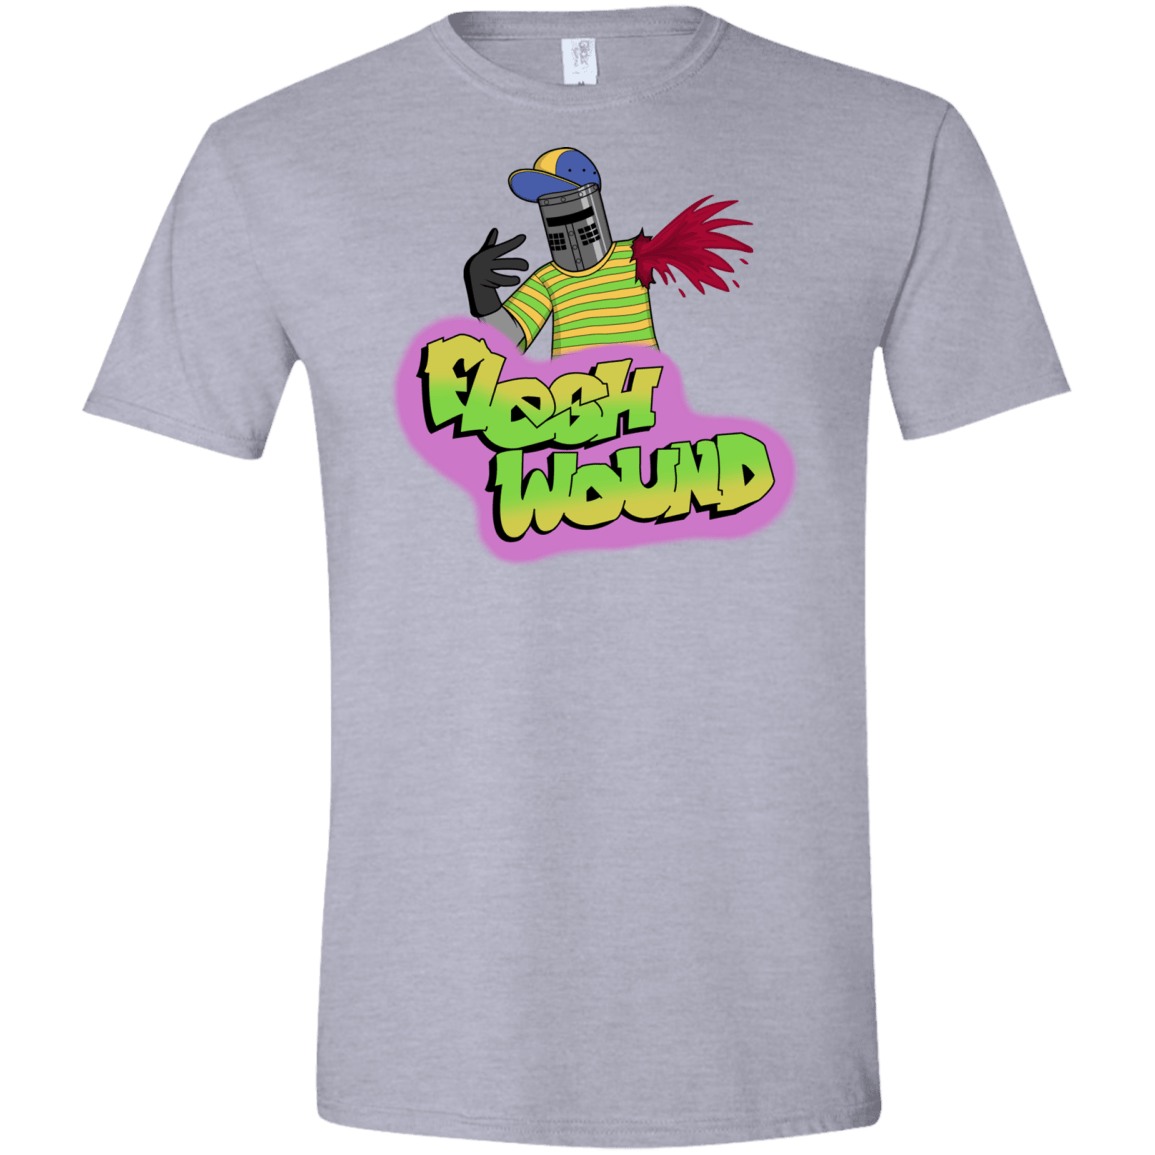 T-Shirts Sport Grey / X-Small Flesh Wound Men's Semi-Fitted Softstyle